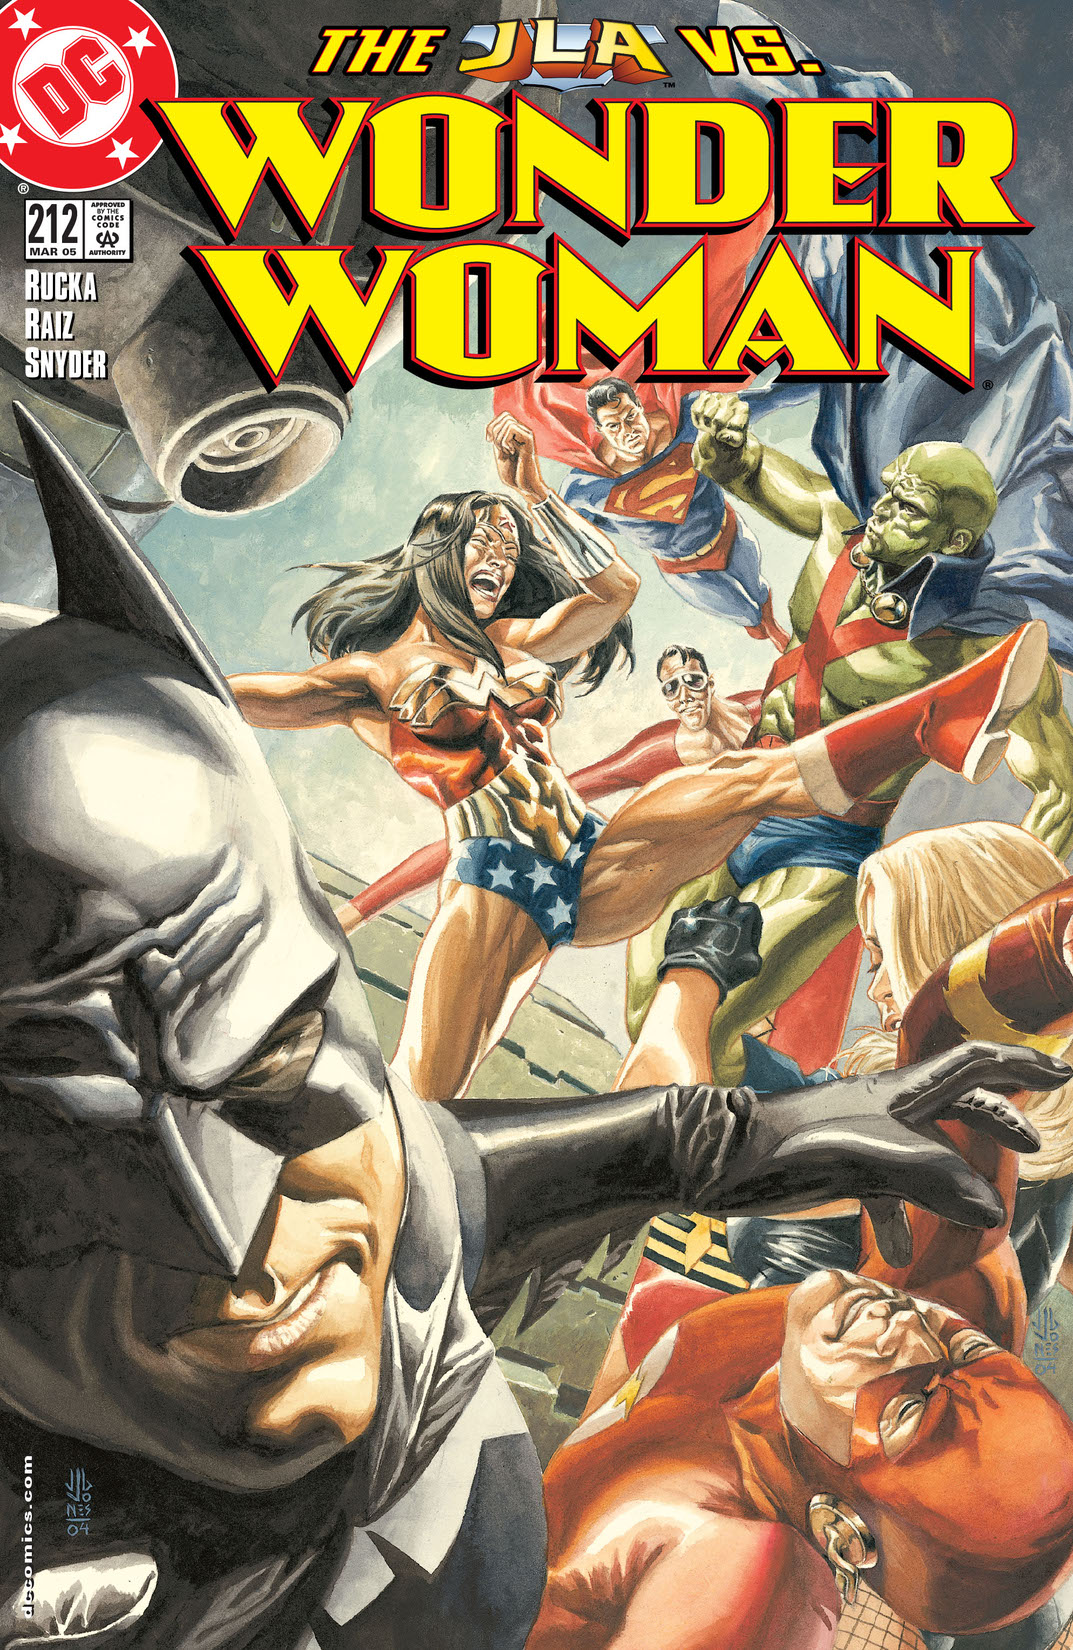 Wonder Woman (1986-) #212 preview images